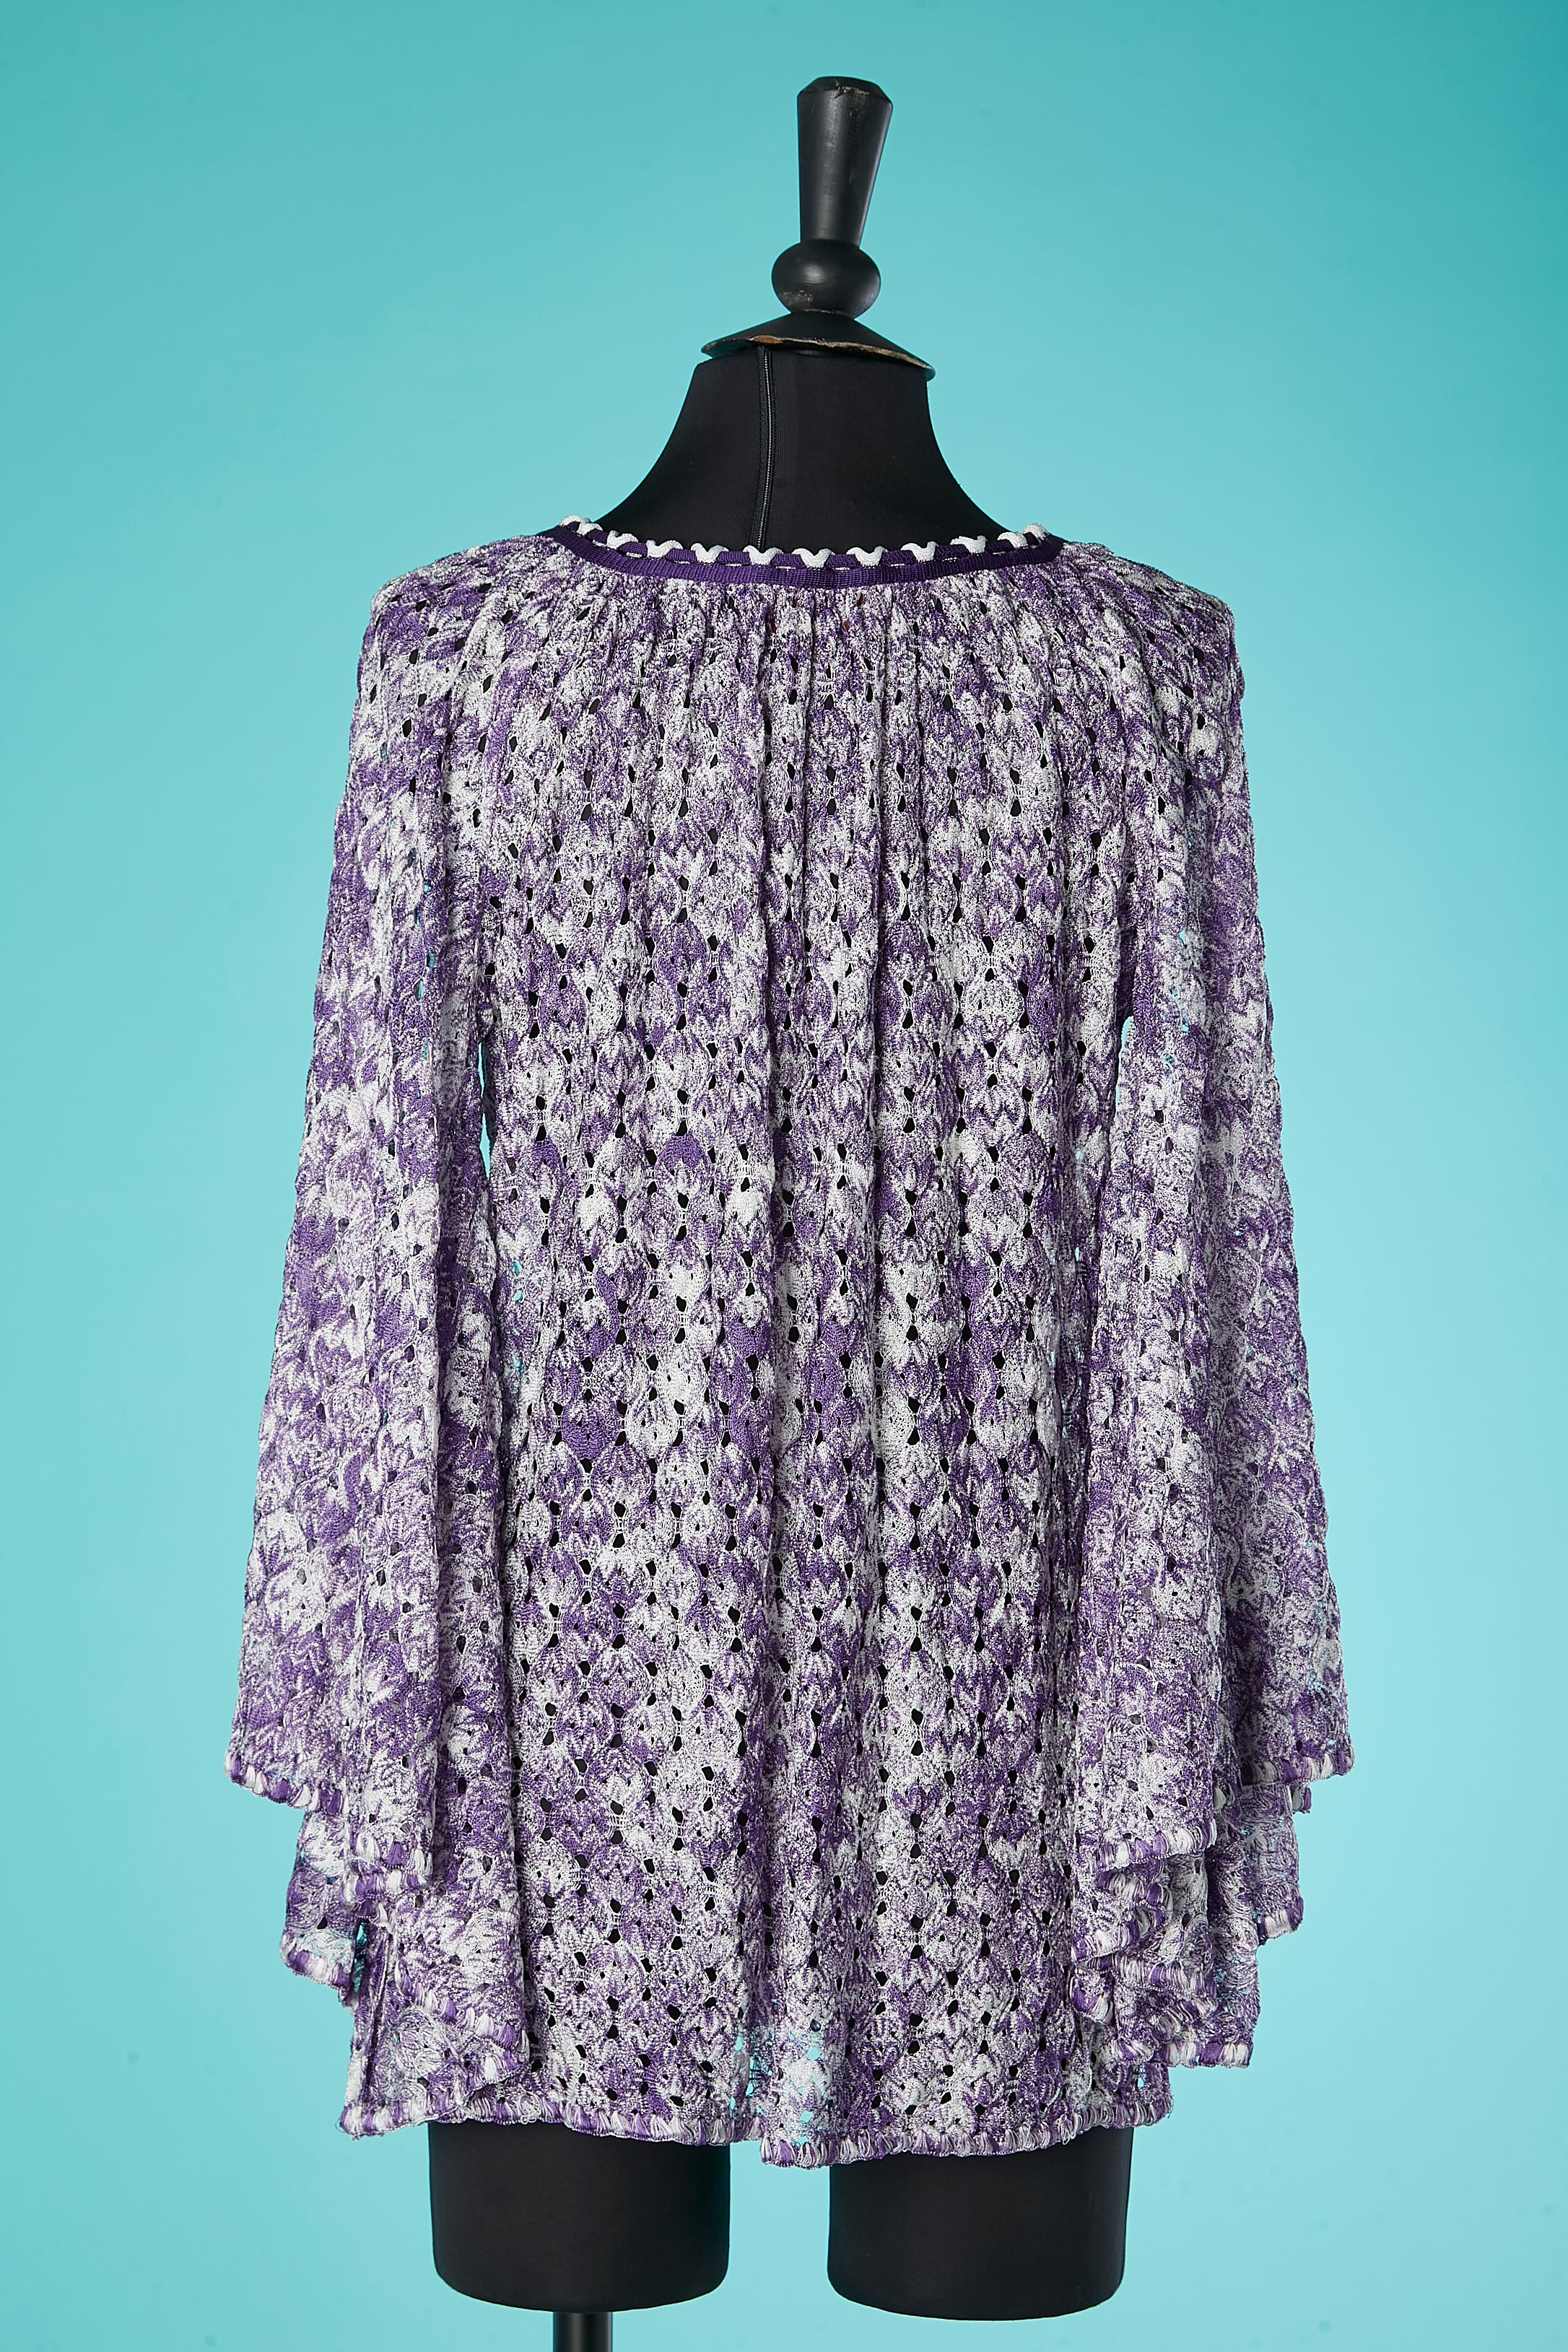 Purple and white rayon see-through knit tunique with wide sleeves Missoni  For Sale 2